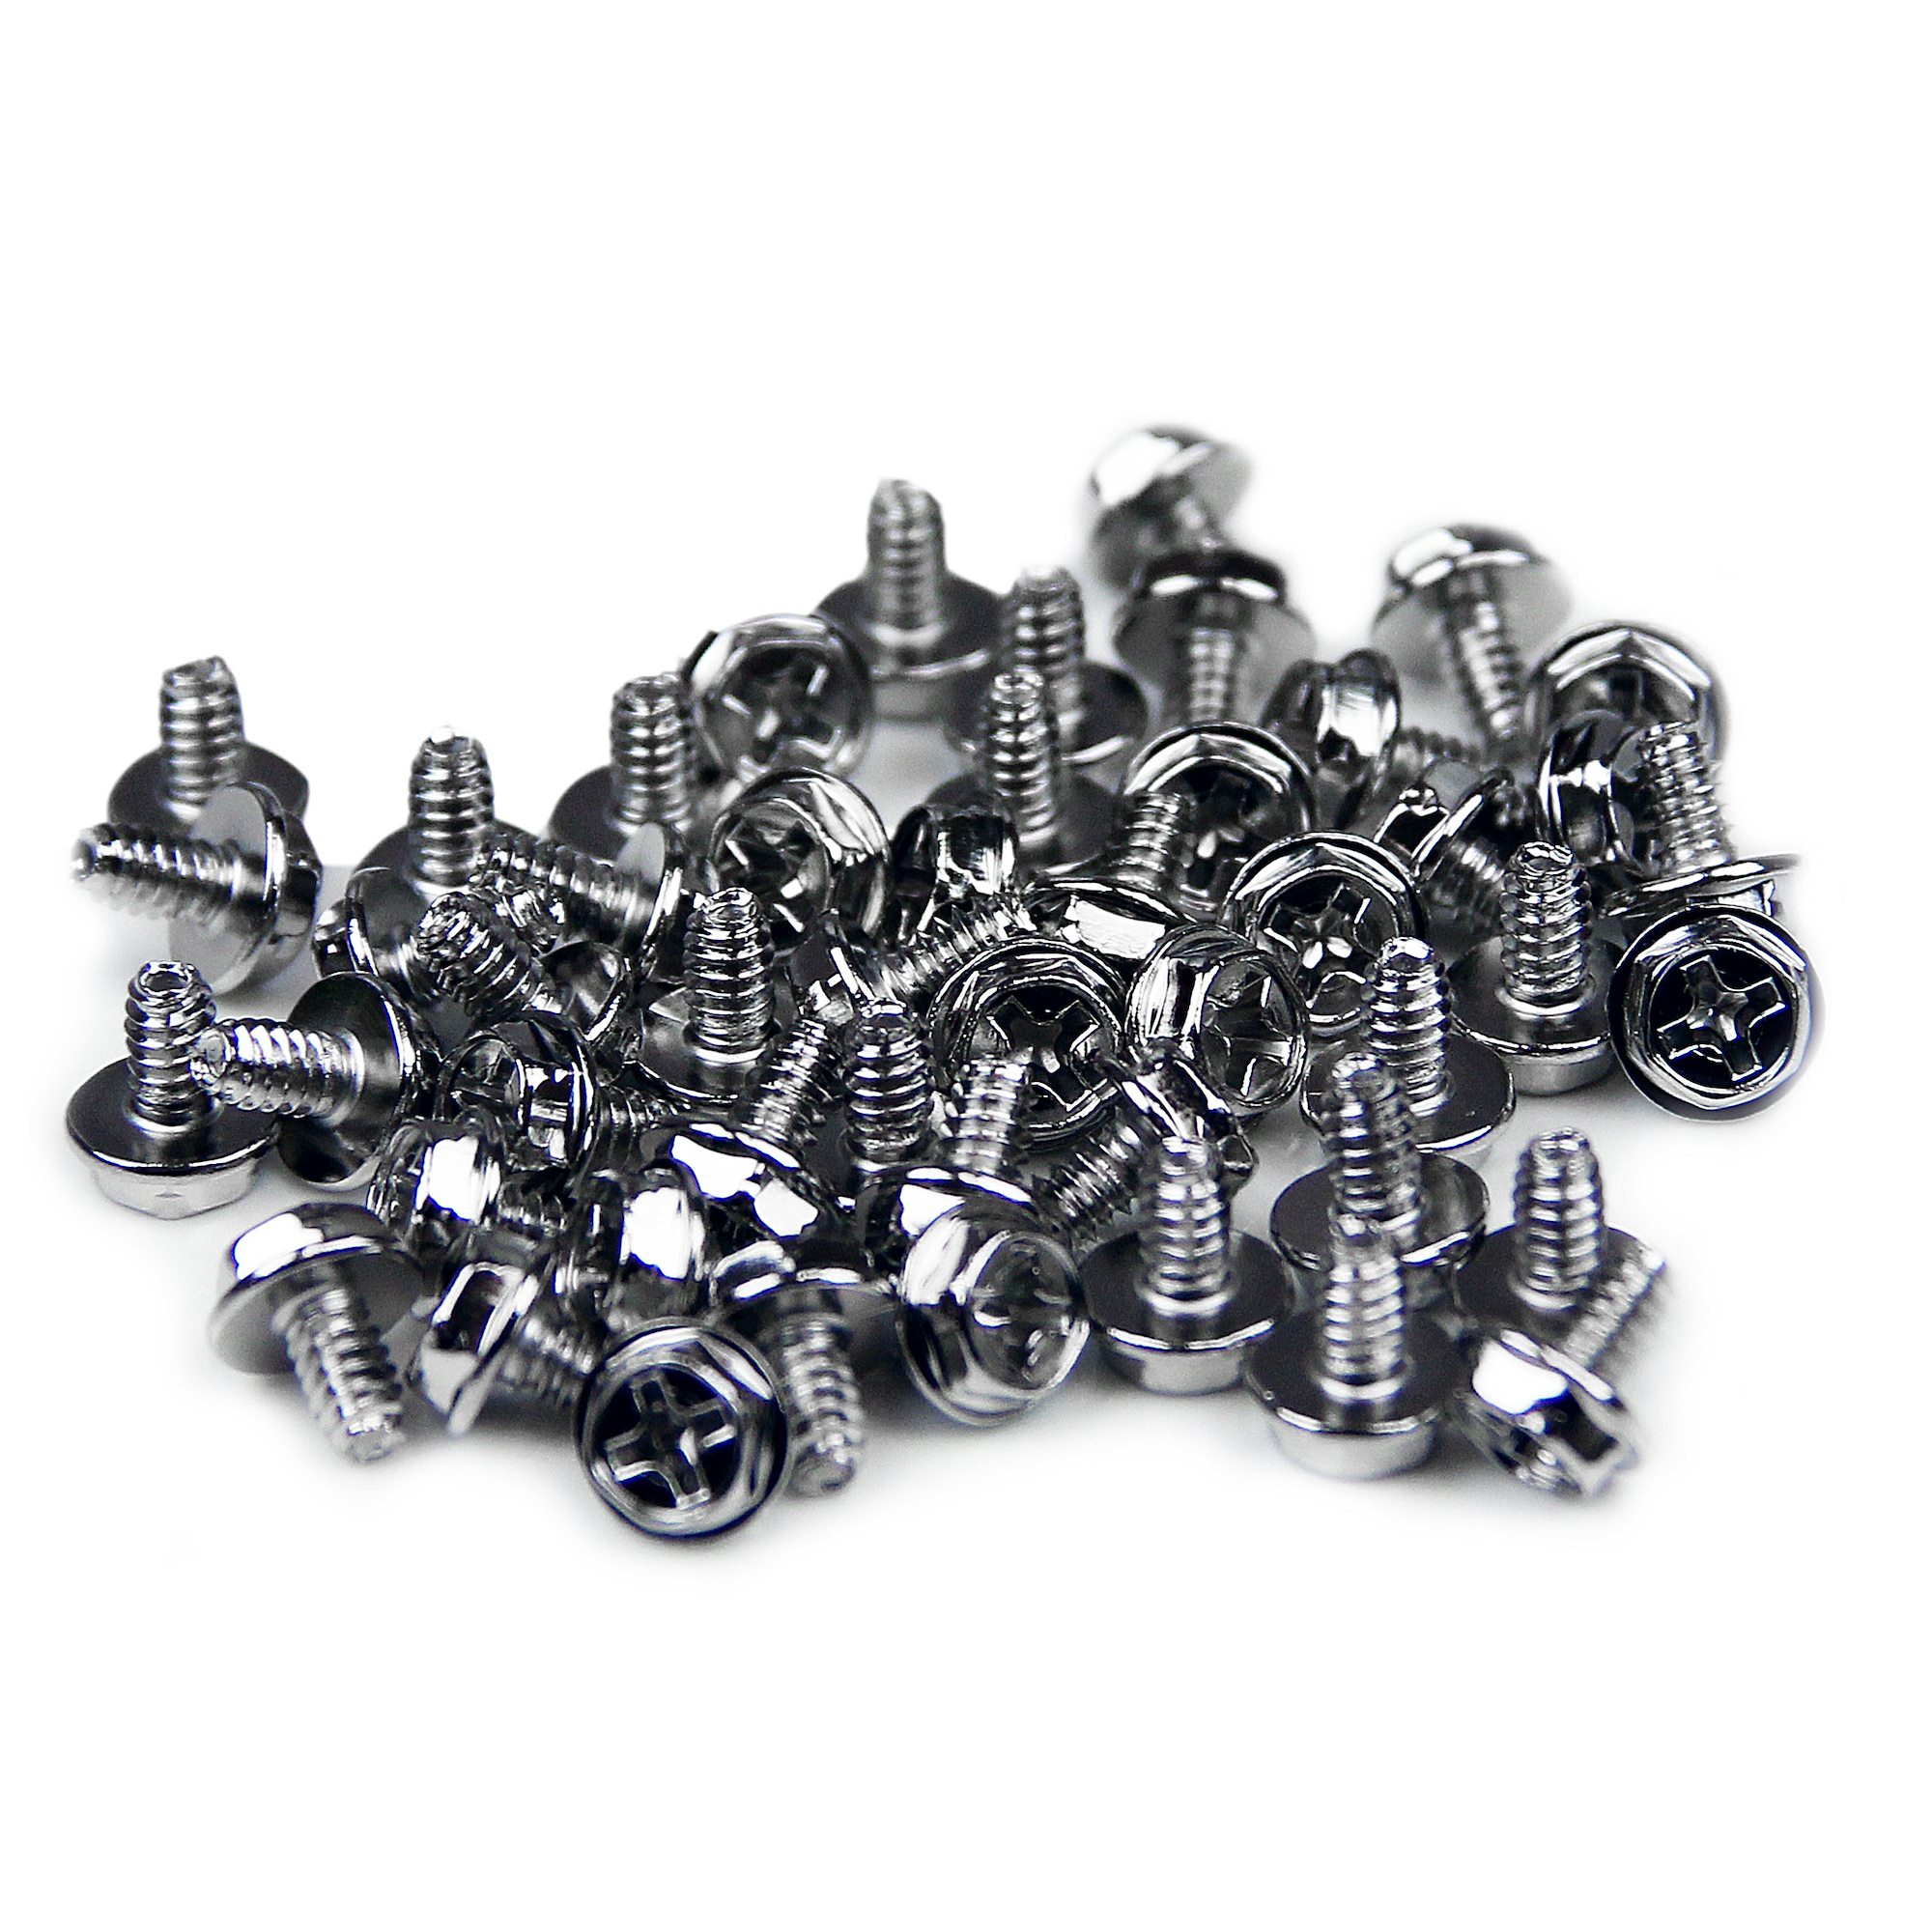 Replacement PC Mounting Screws #6-32 x 1/4in Long Standoff - 50 Pack